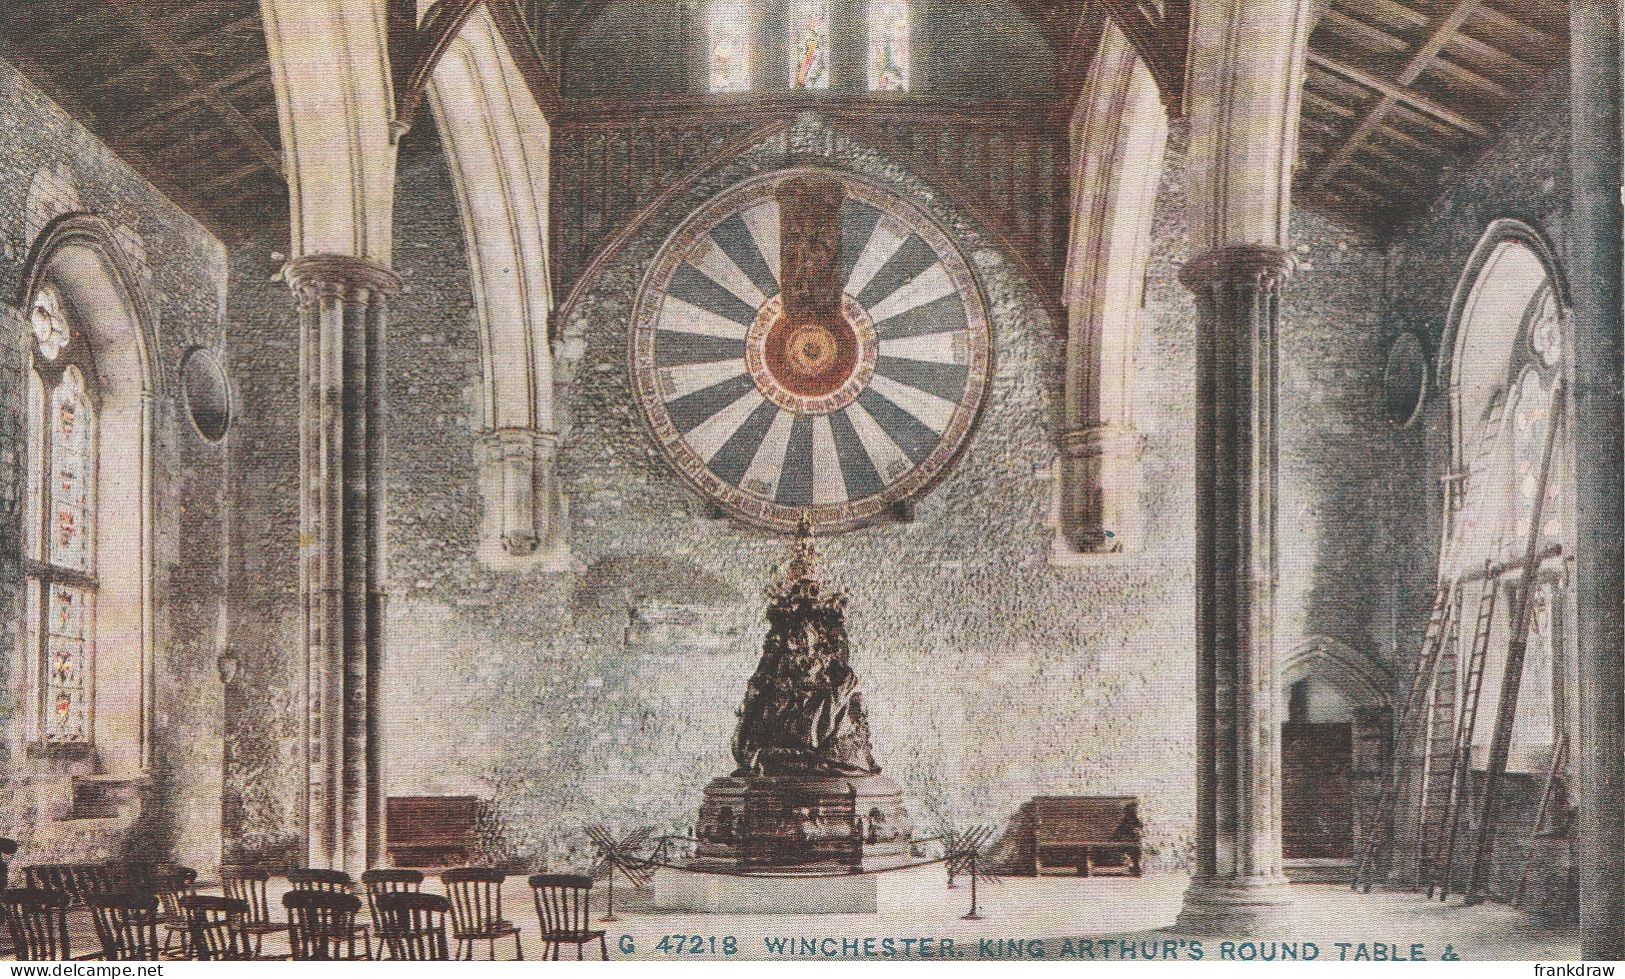 Postcard - Winchester - King Arthur's Round Table And Queen Victoria Statue - Card No.47218 - VERY GOOD - Unclassified